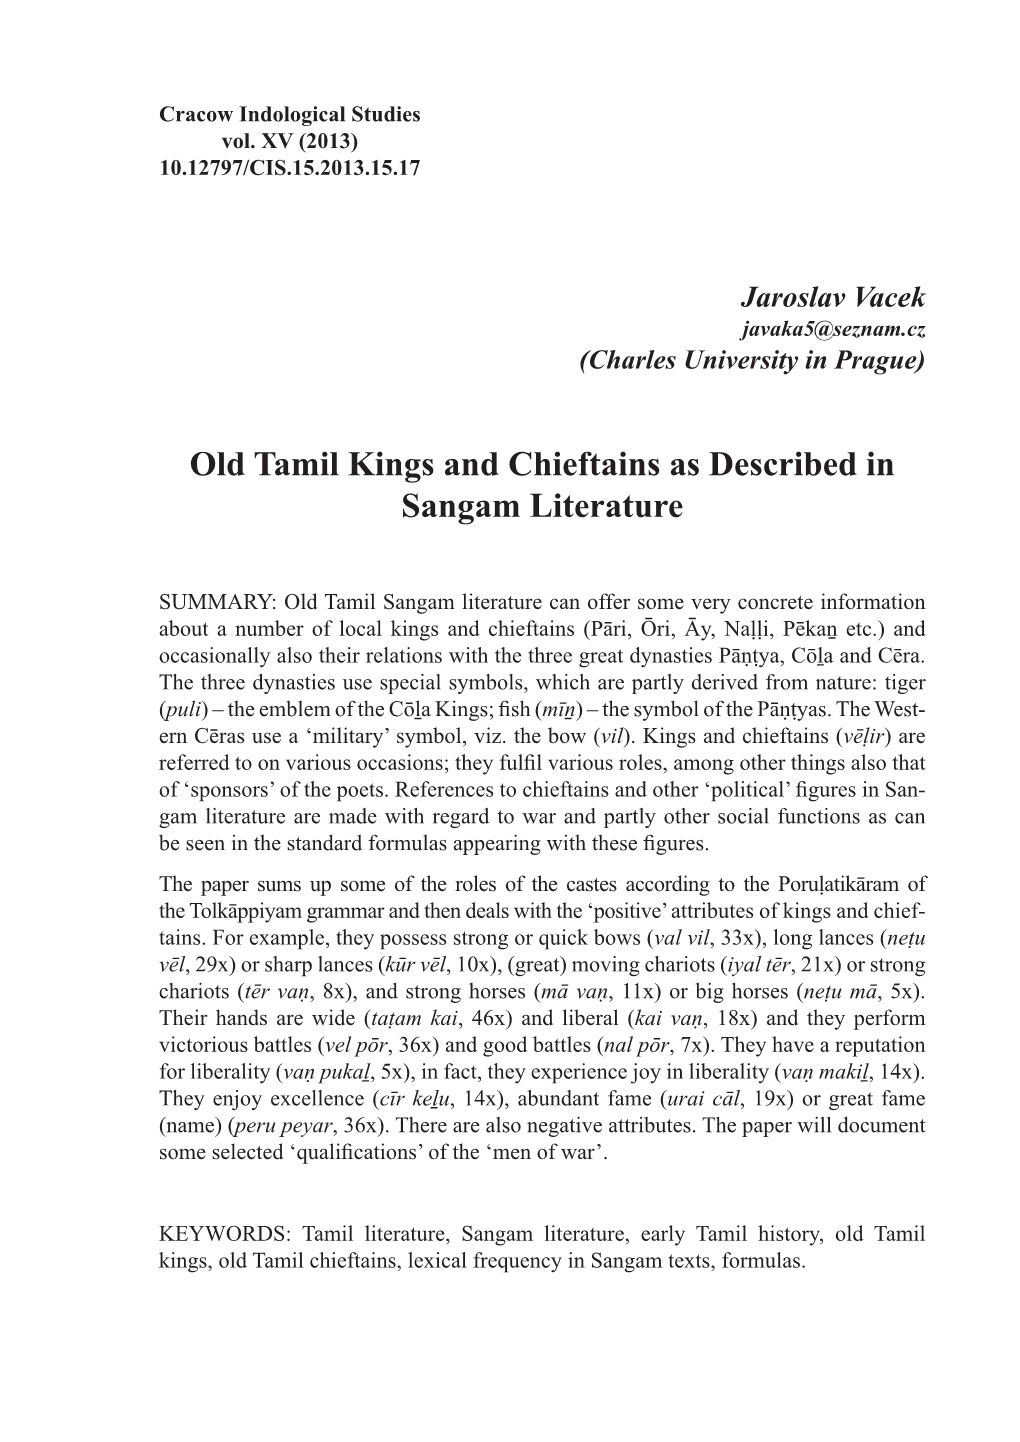 Old Tamil Kings and Chieftains As Described in Sangam Literature